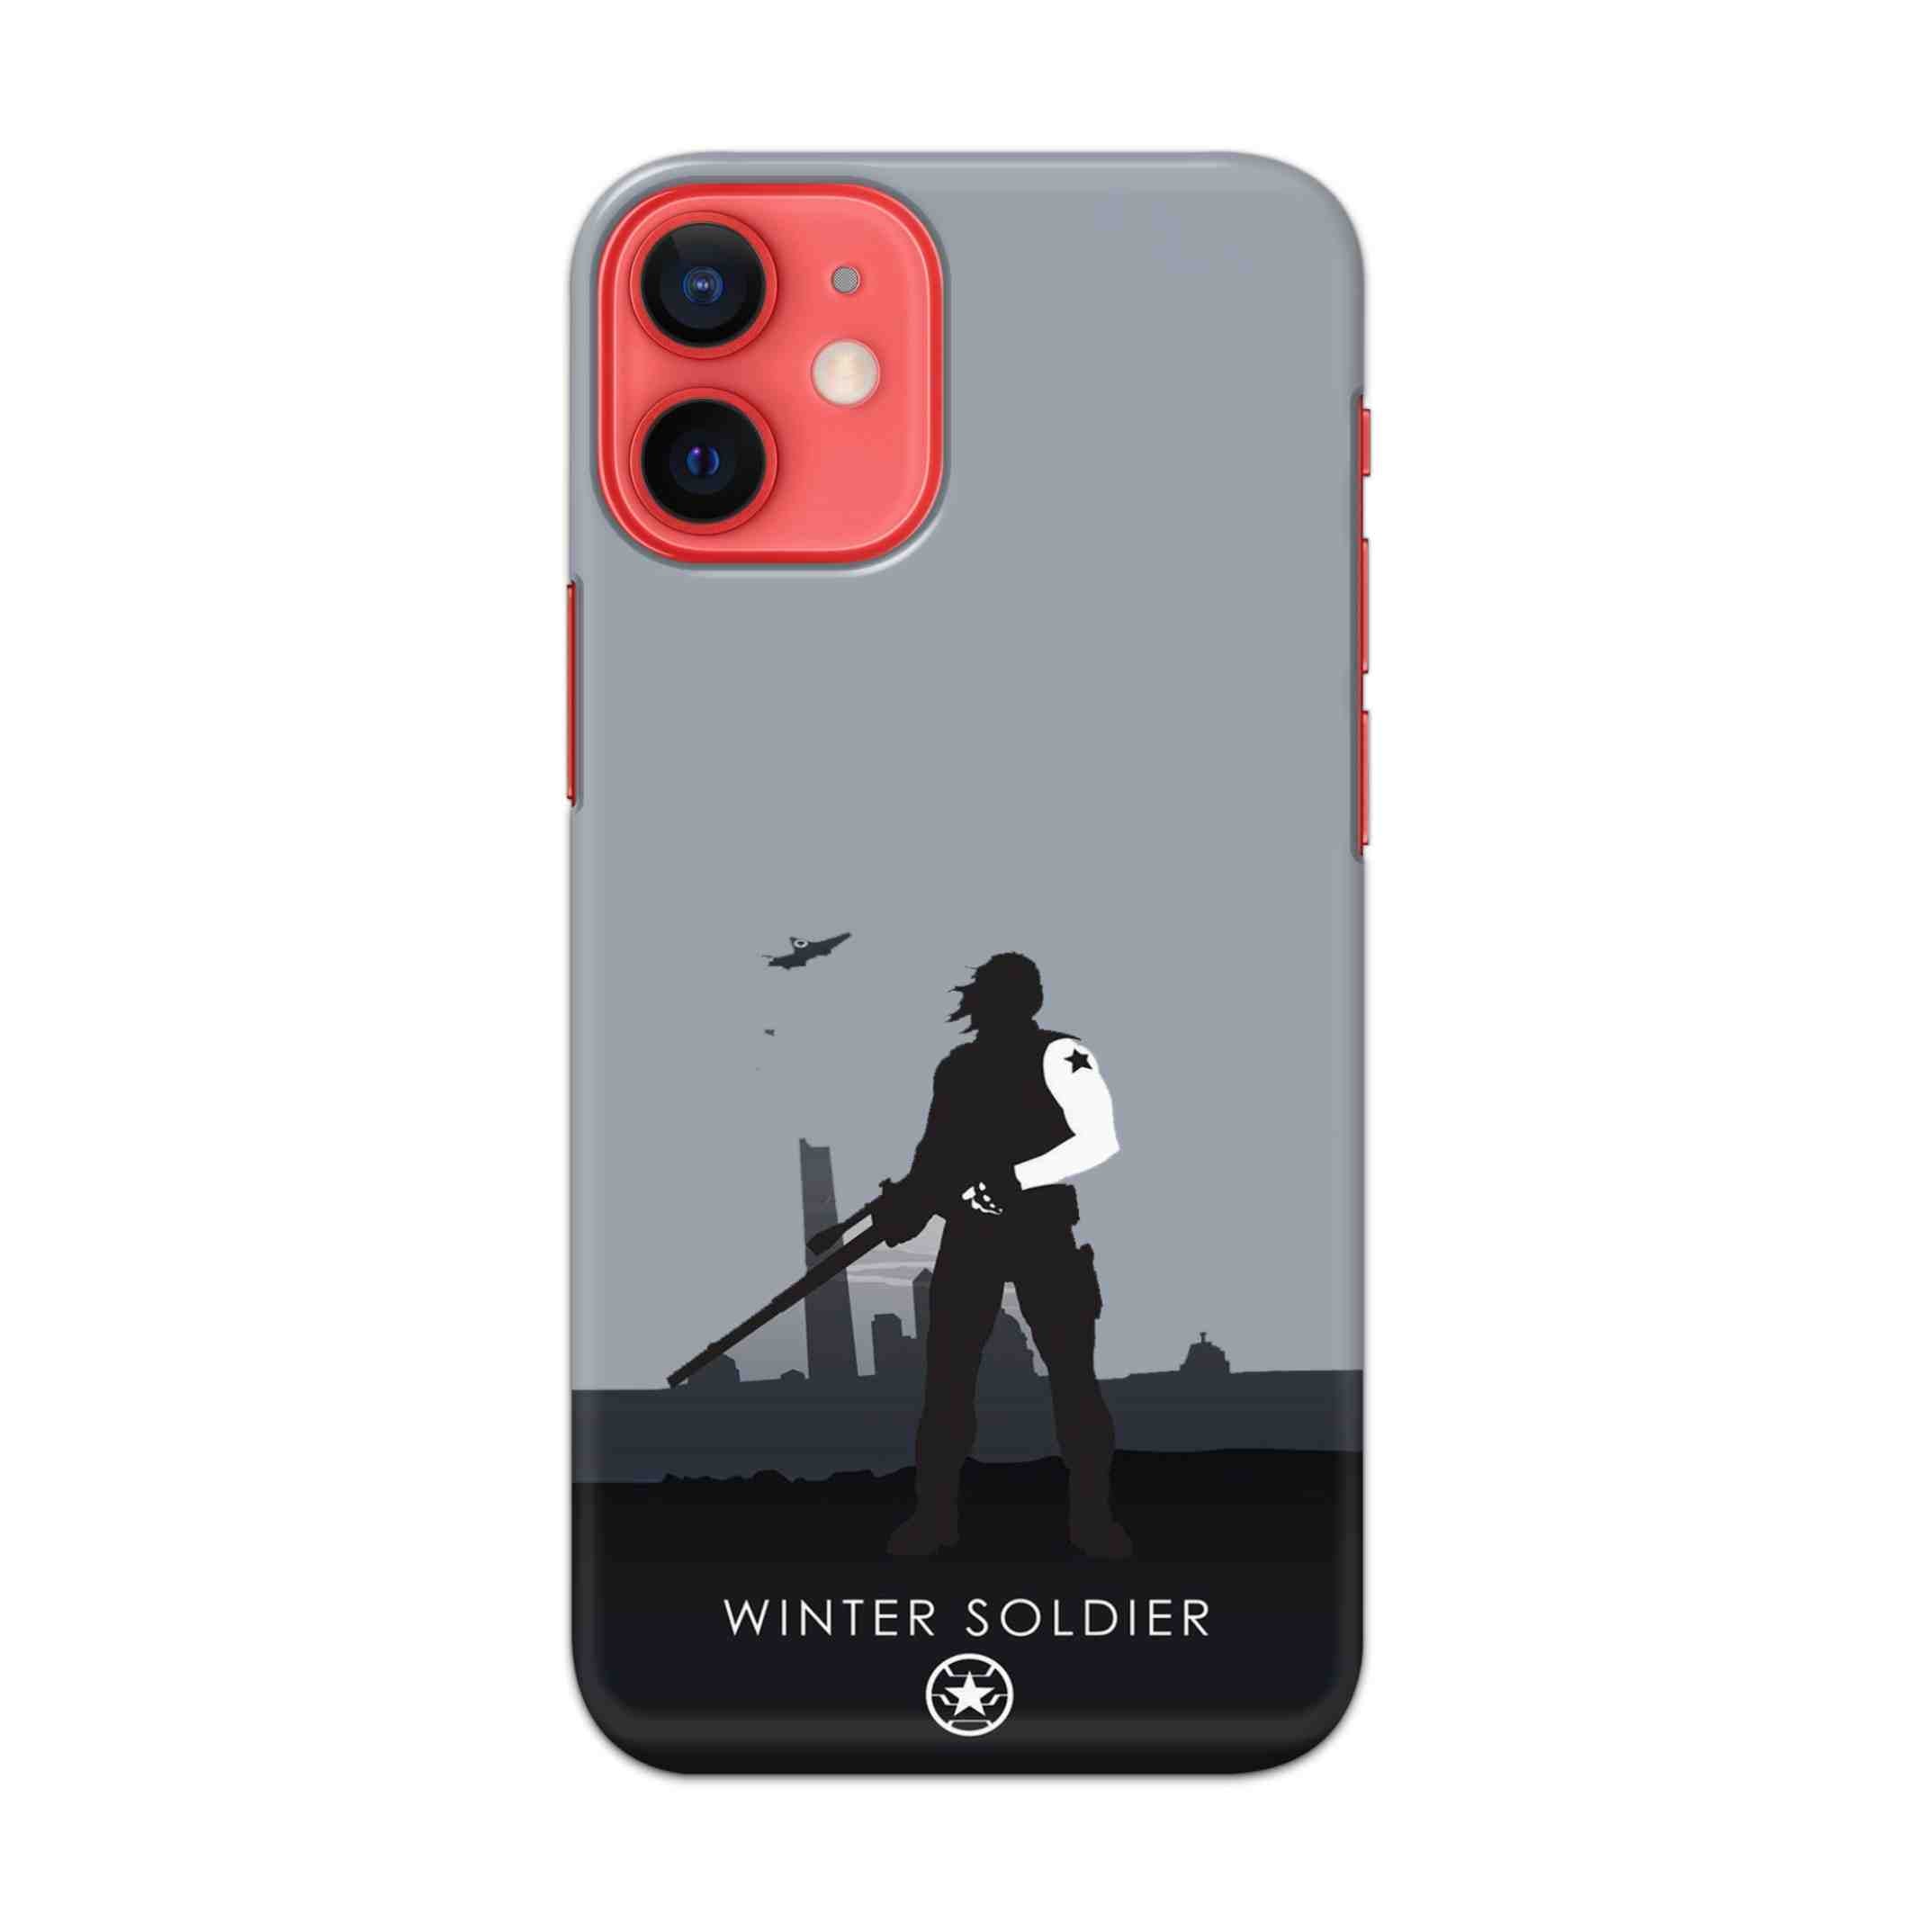 Buy Winter Soldier Hard Back Mobile Phone Case/Cover For Apple iPhone 12 mini Online